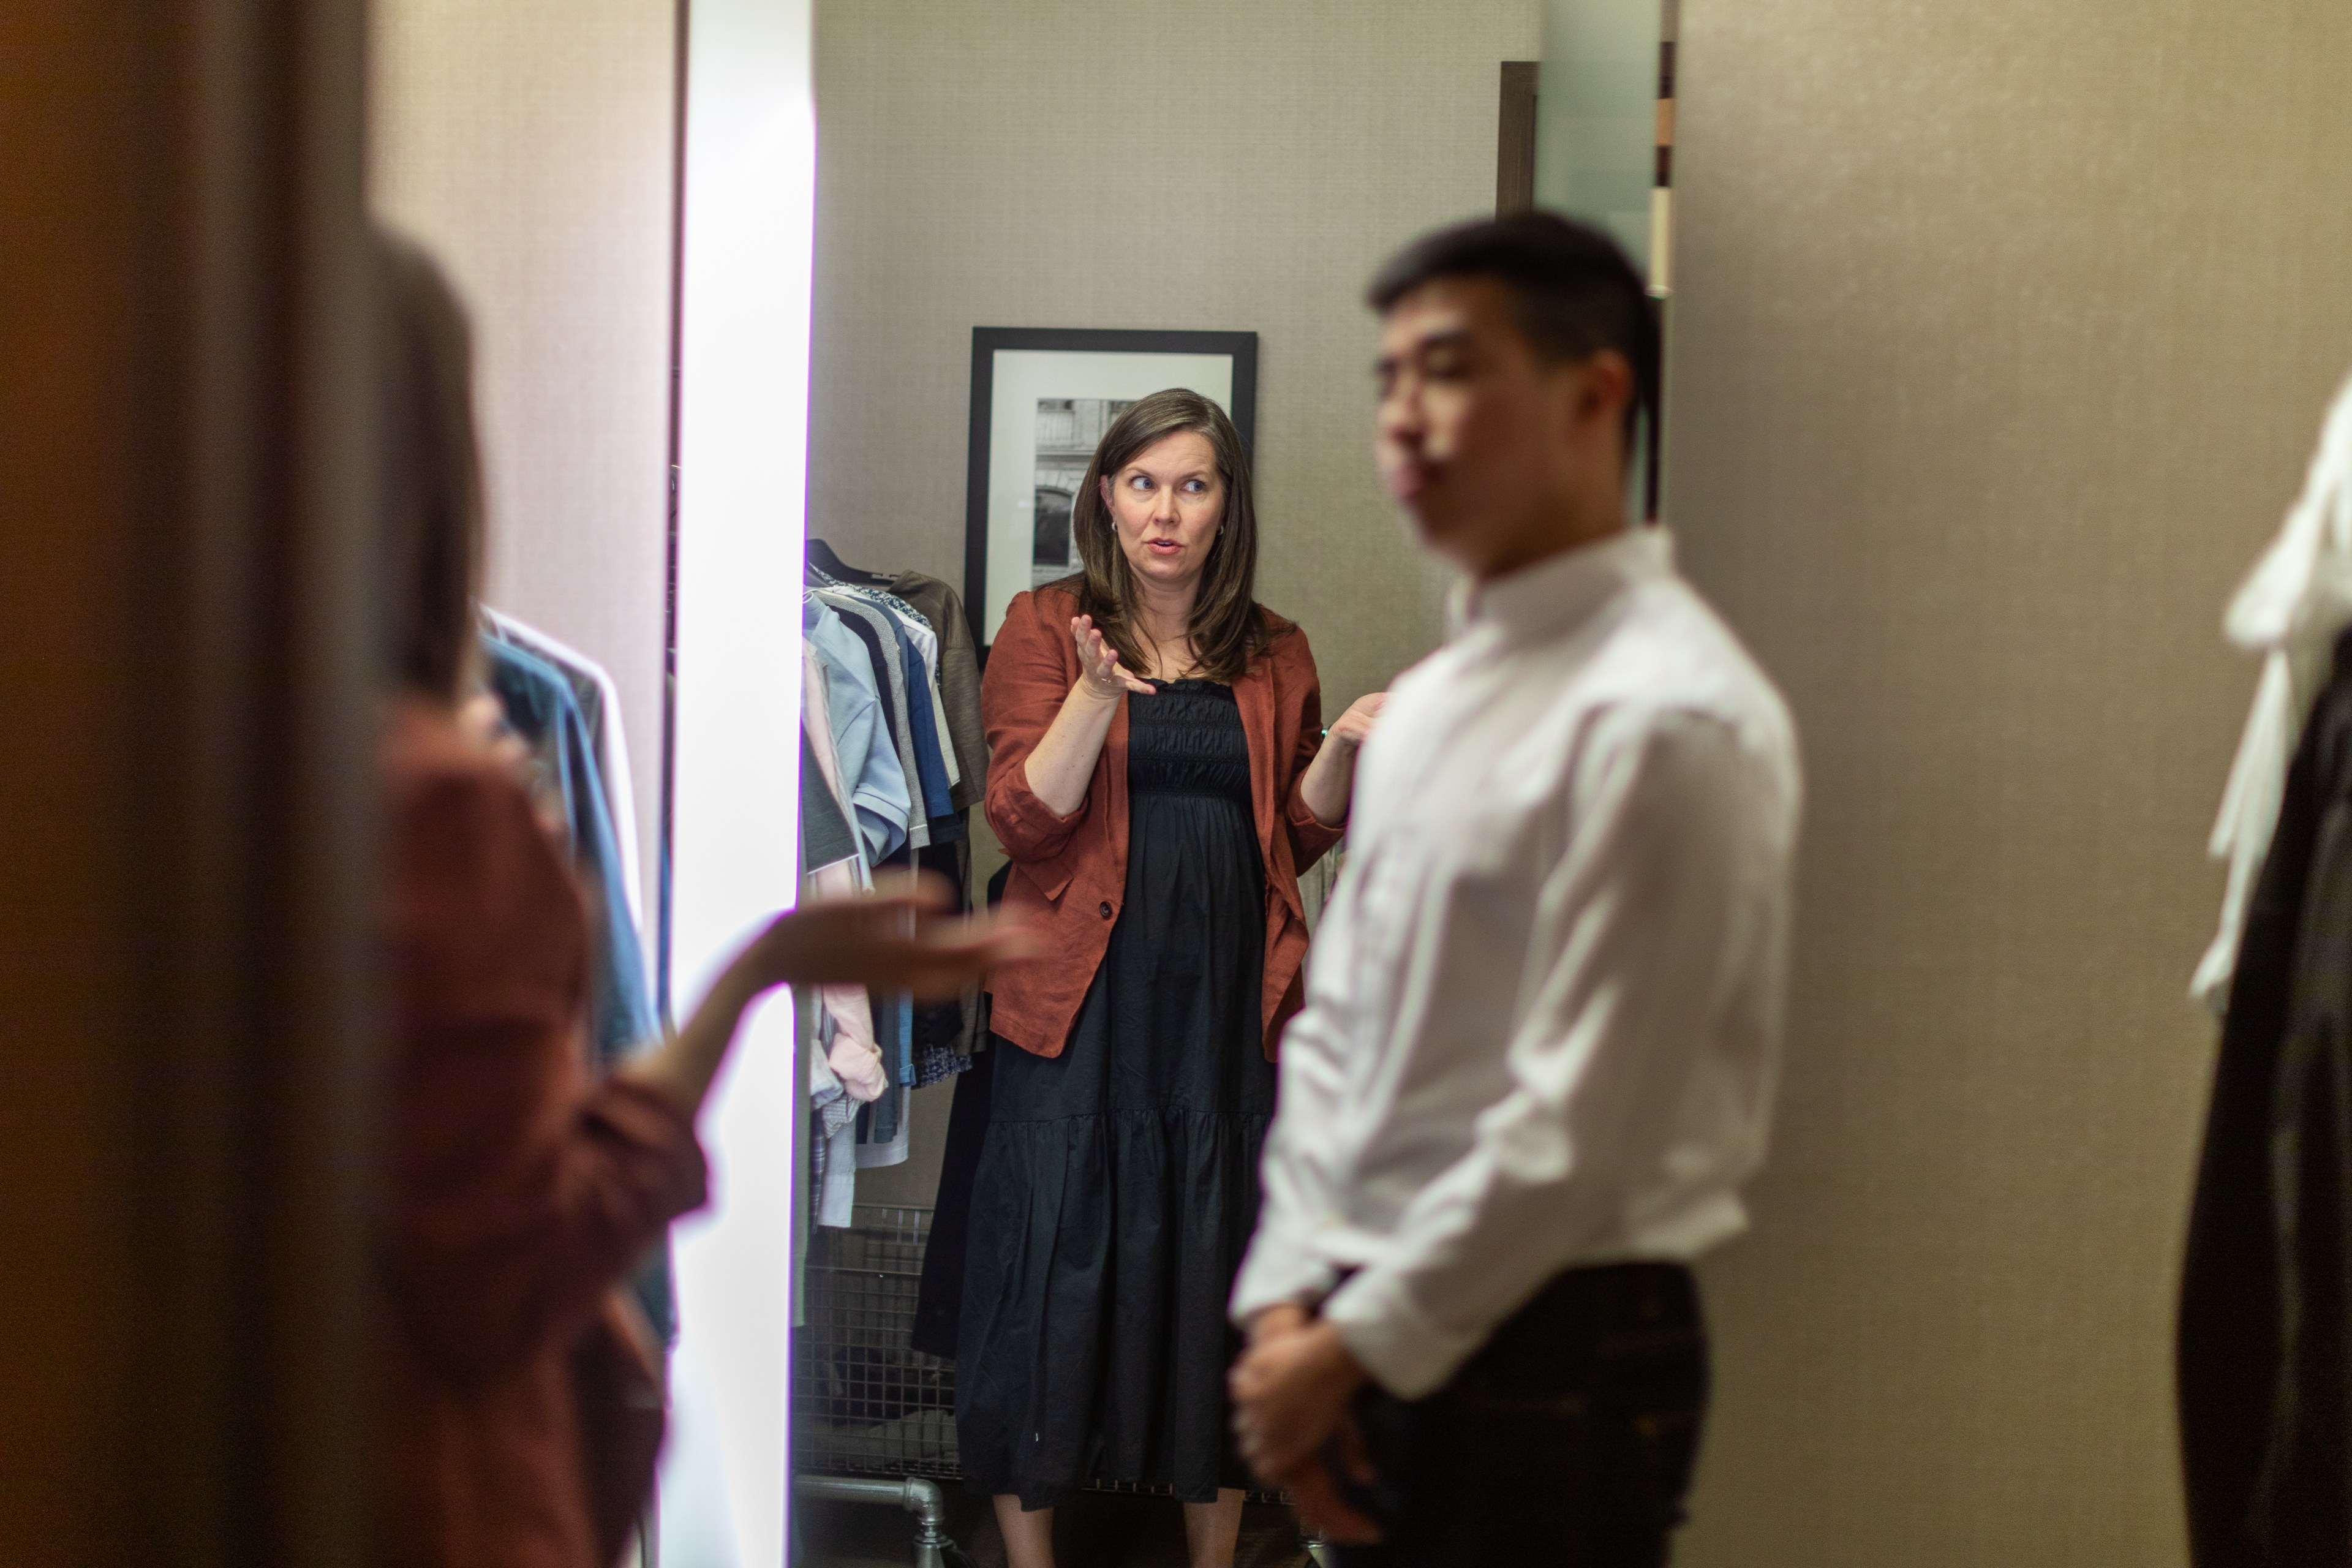 A woman in a brown jacket and black dress stands in front of a mirror, gesturing, while a man in a white shirt stands nearby. Clothing racks are visible.